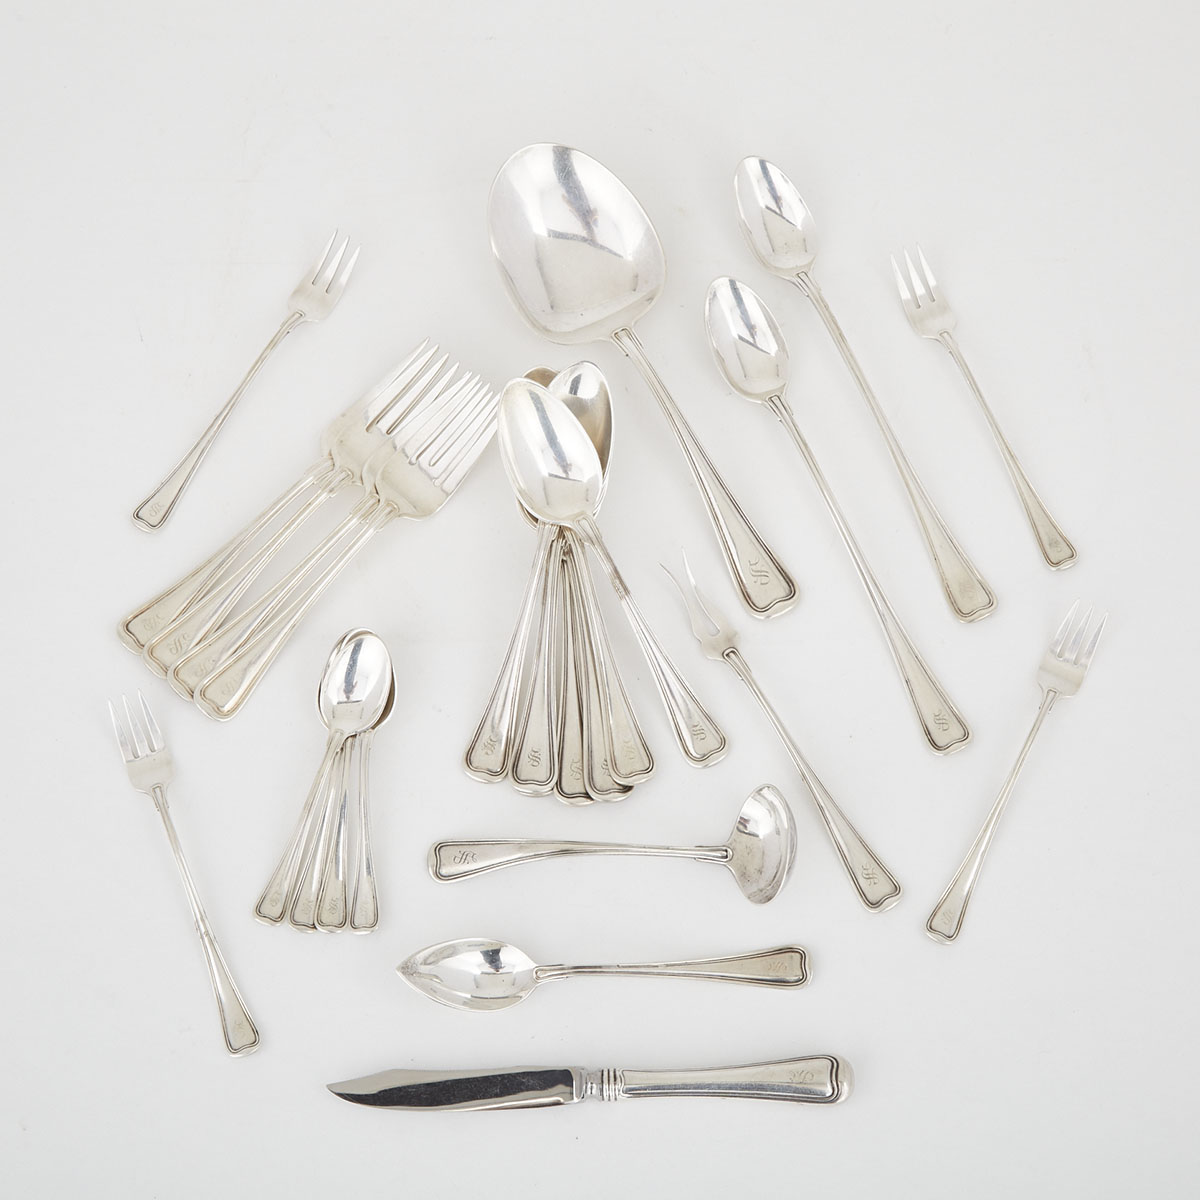 American Silver ‘Old French’ Pattern Flatware, Gorham Mfg. Co., Providence, R.I., early 20th century